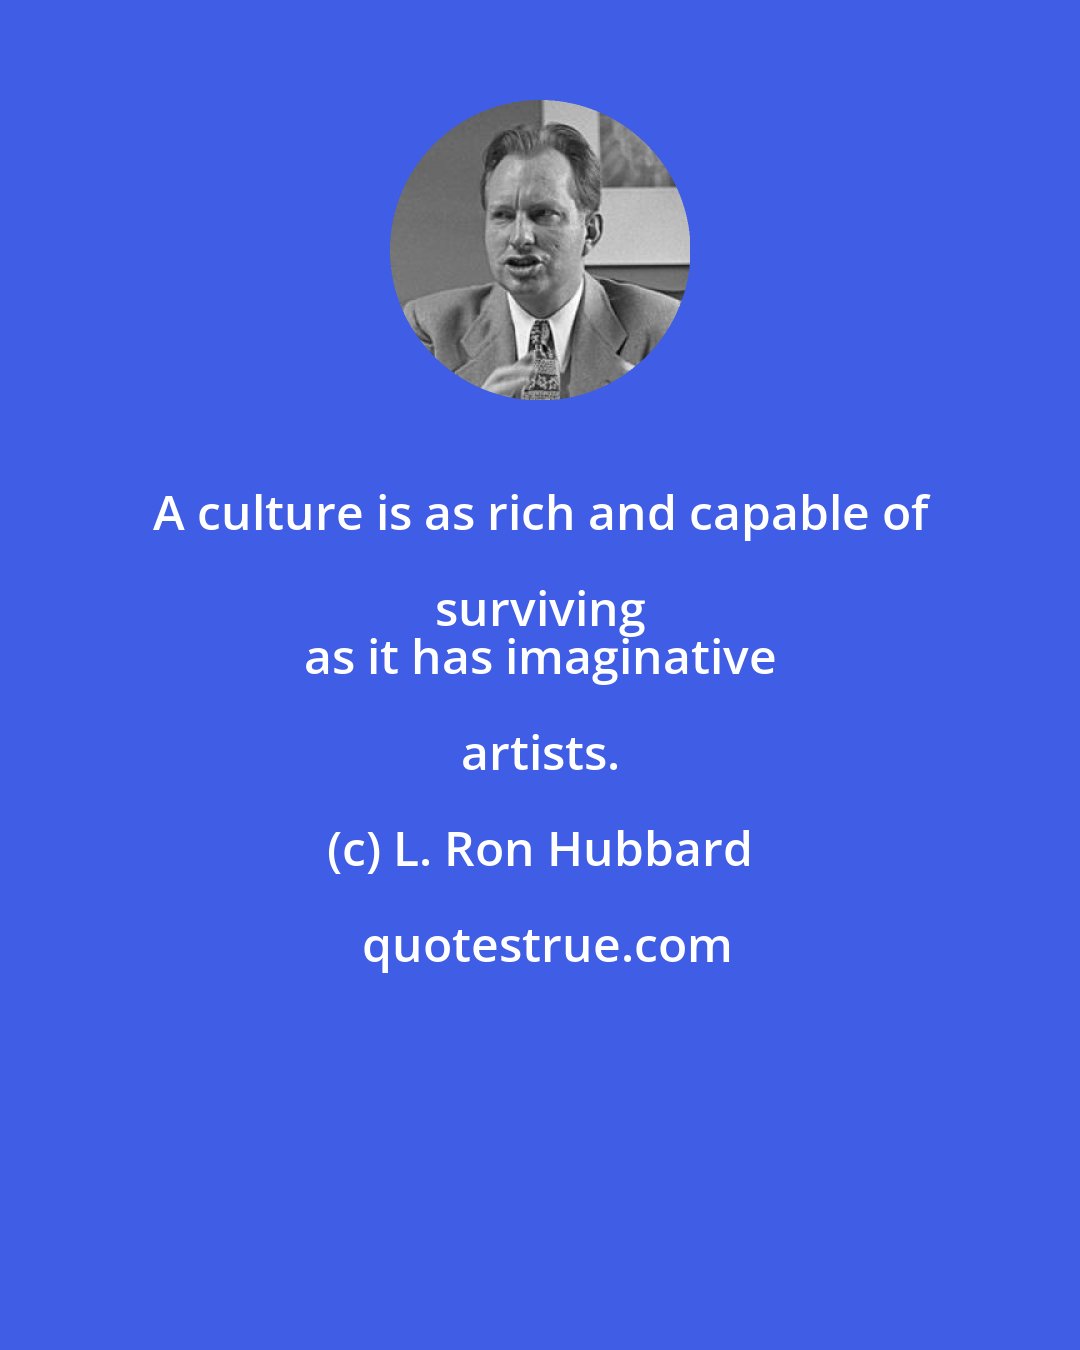 L. Ron Hubbard: A culture is as rich and capable of surviving 
 as it has imaginative artists.